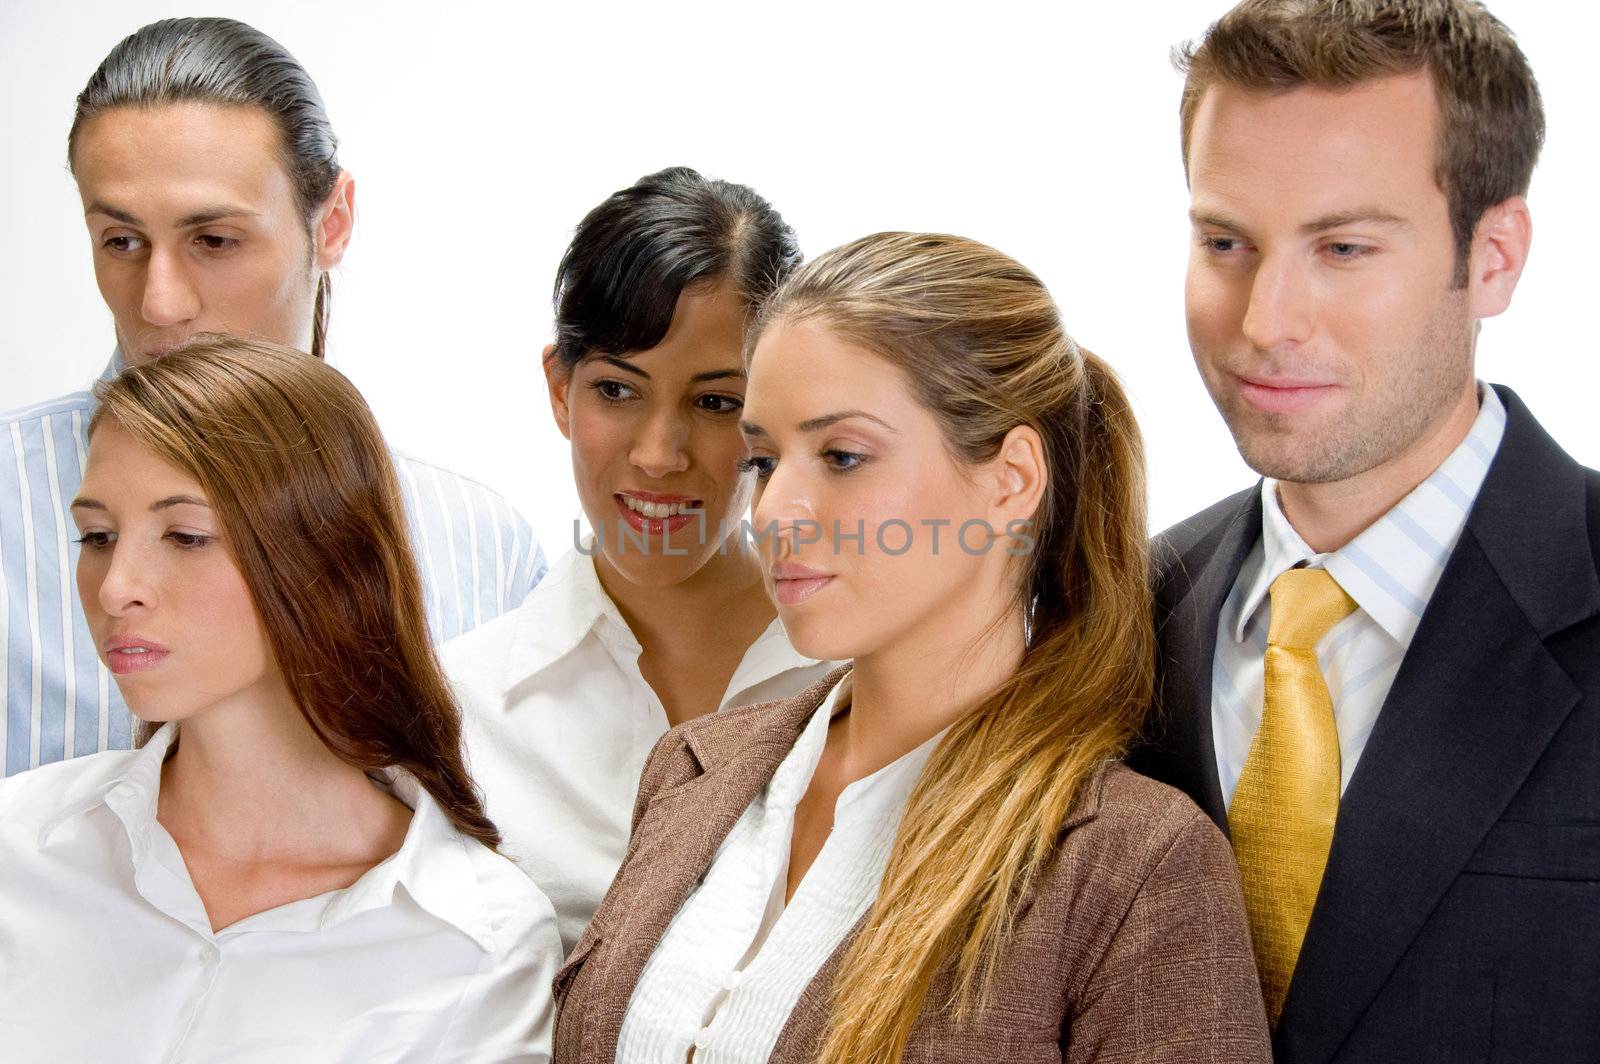 professional business team on an isolated white background